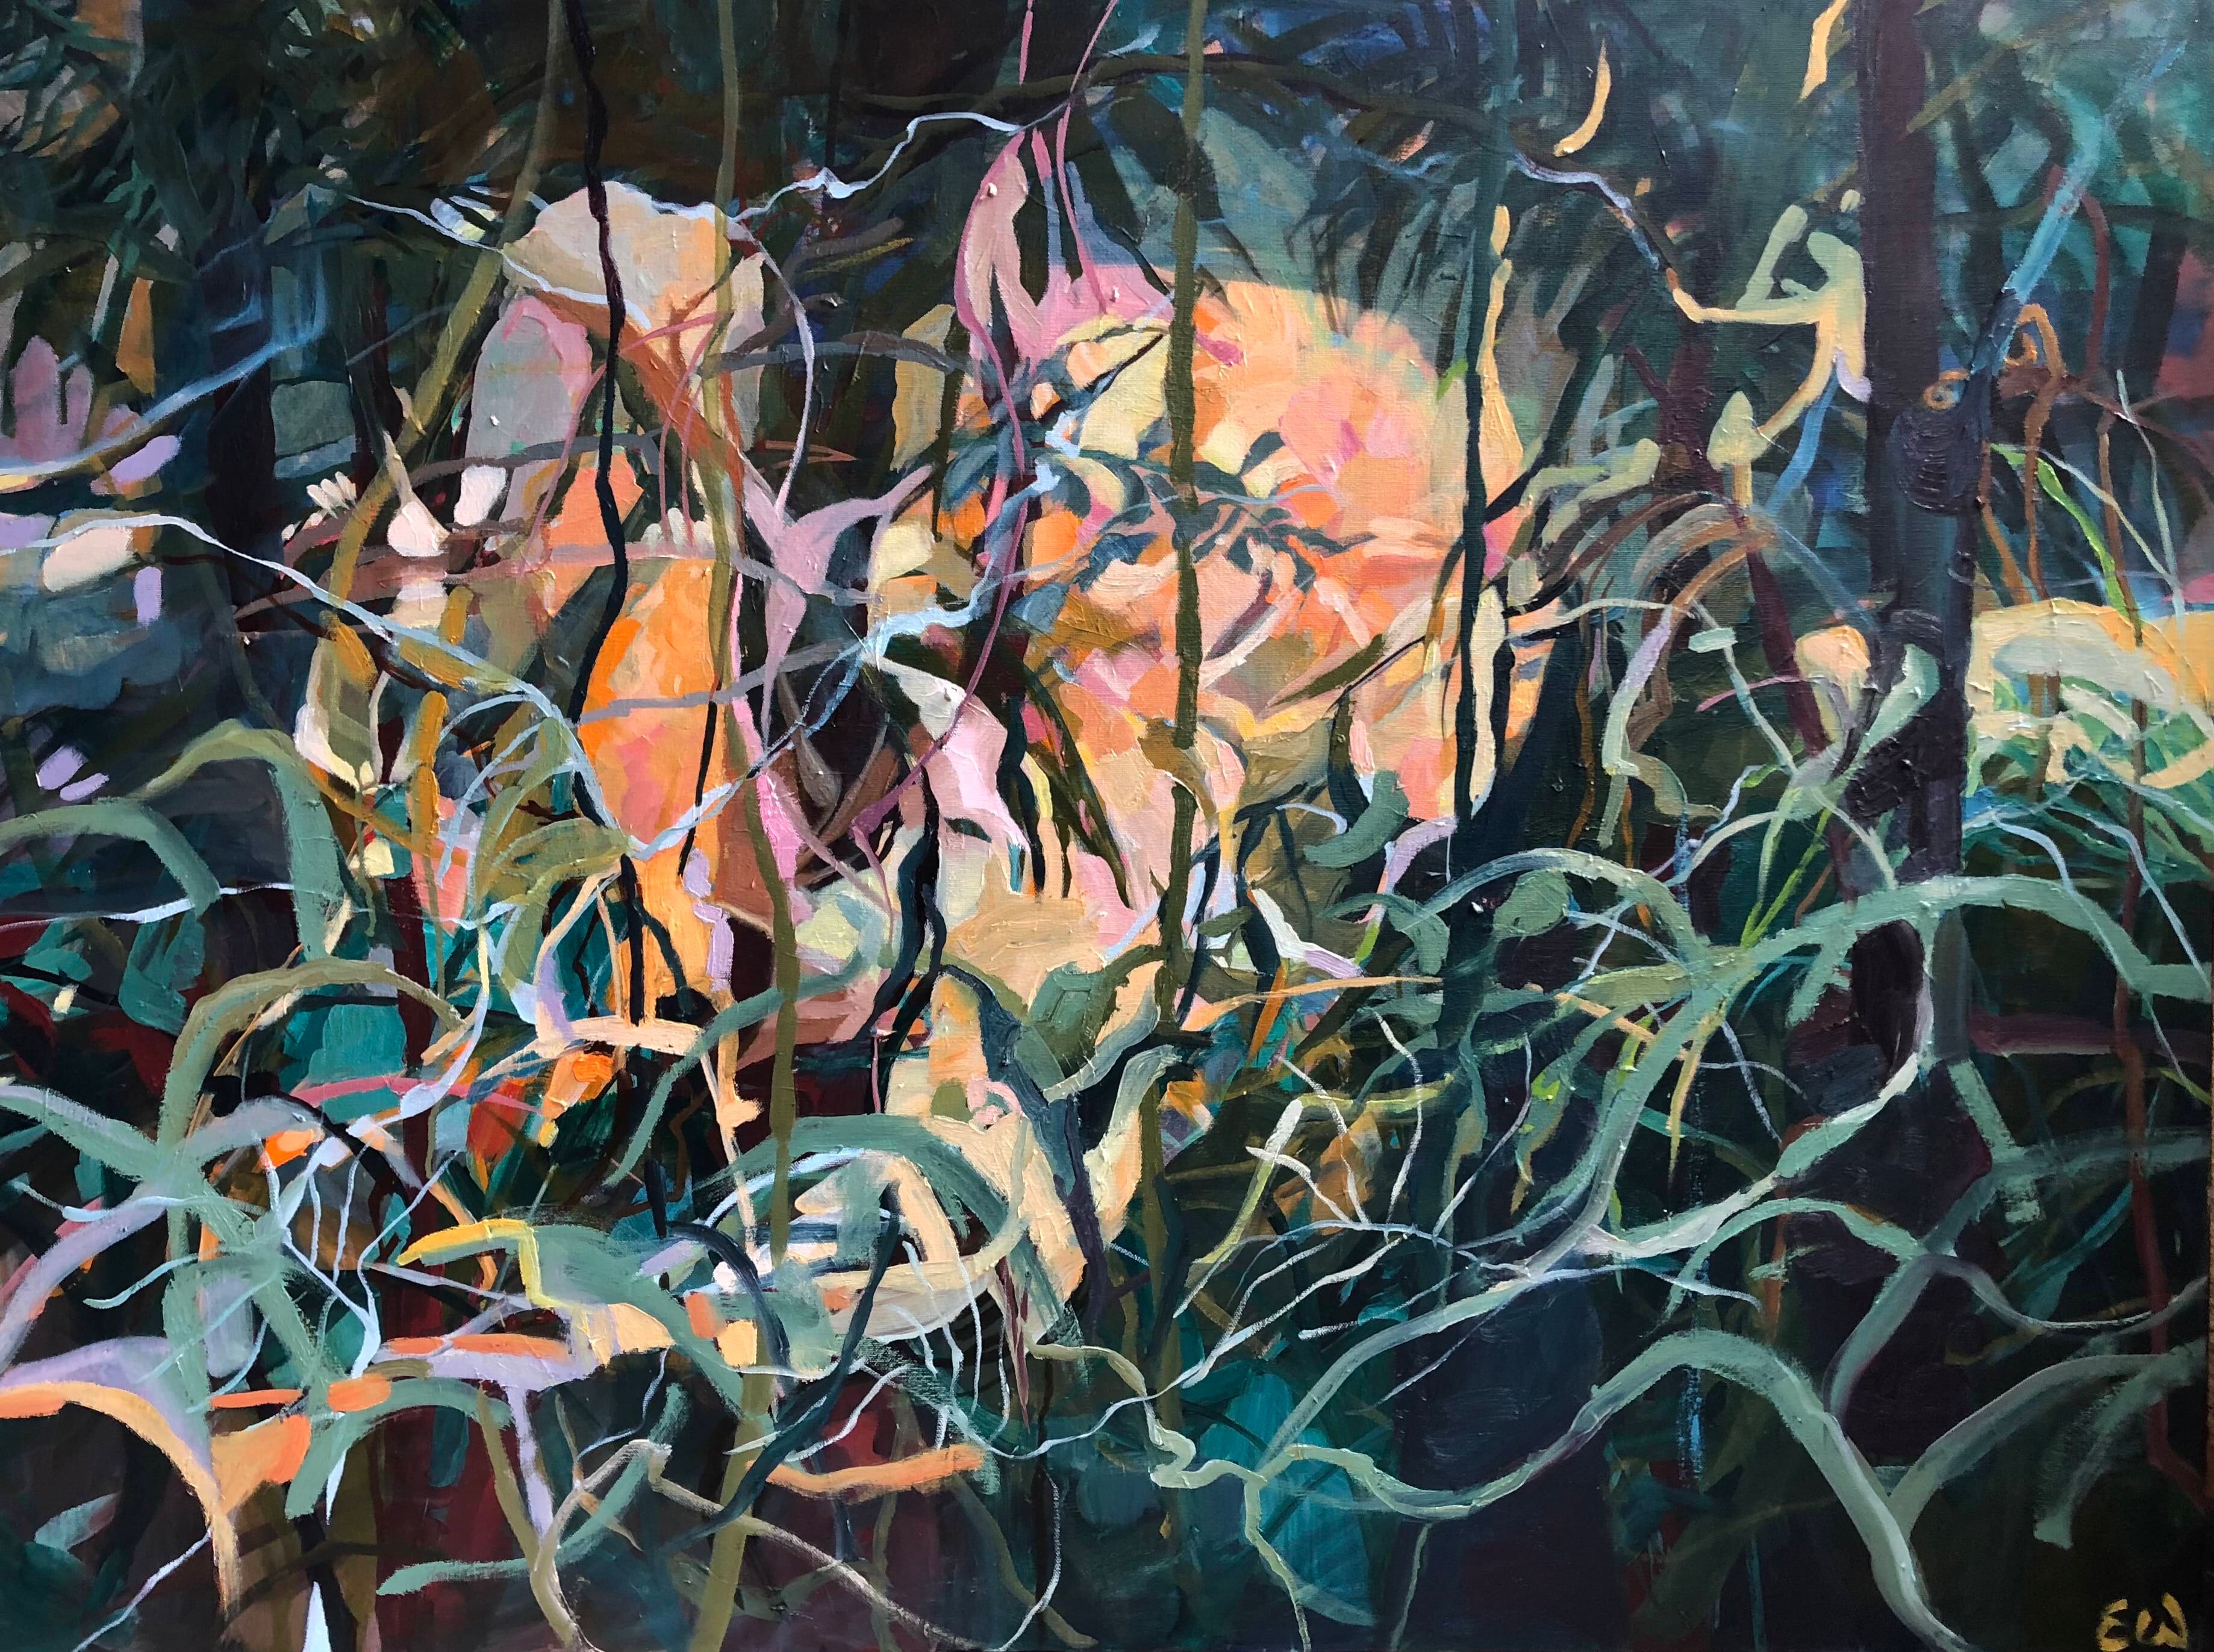 Abstract Image of Foliage, Painting by Erica Wagner